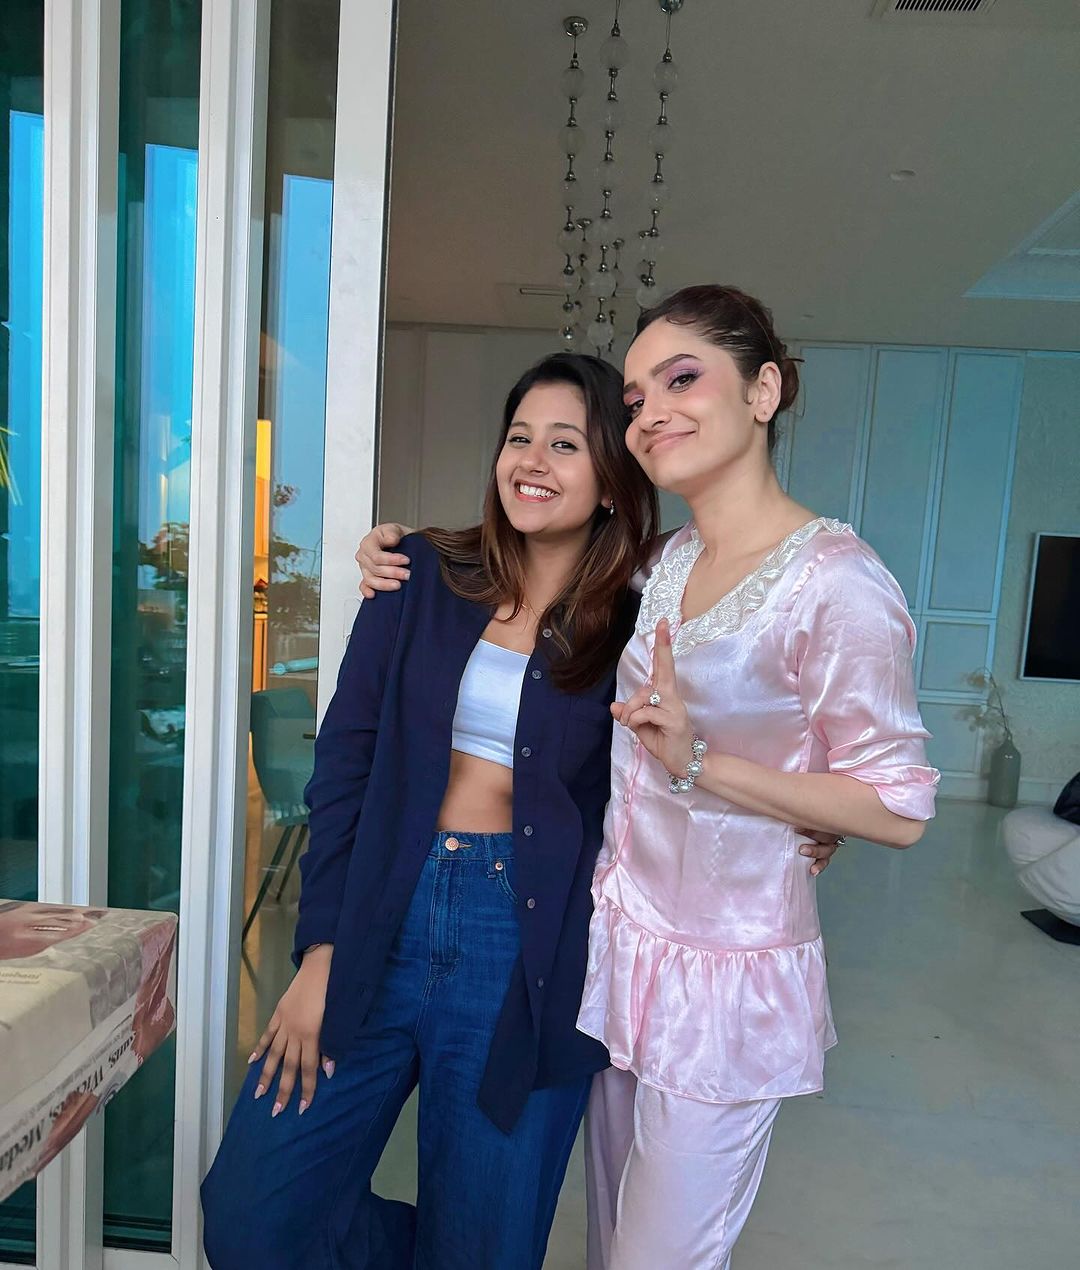 Phenomenon Actress Ankita Lokhande Reunited With Anjali Arora After Bigg Boss Show Ended. Together Posed Beautifully And Shared A Cute Caption!